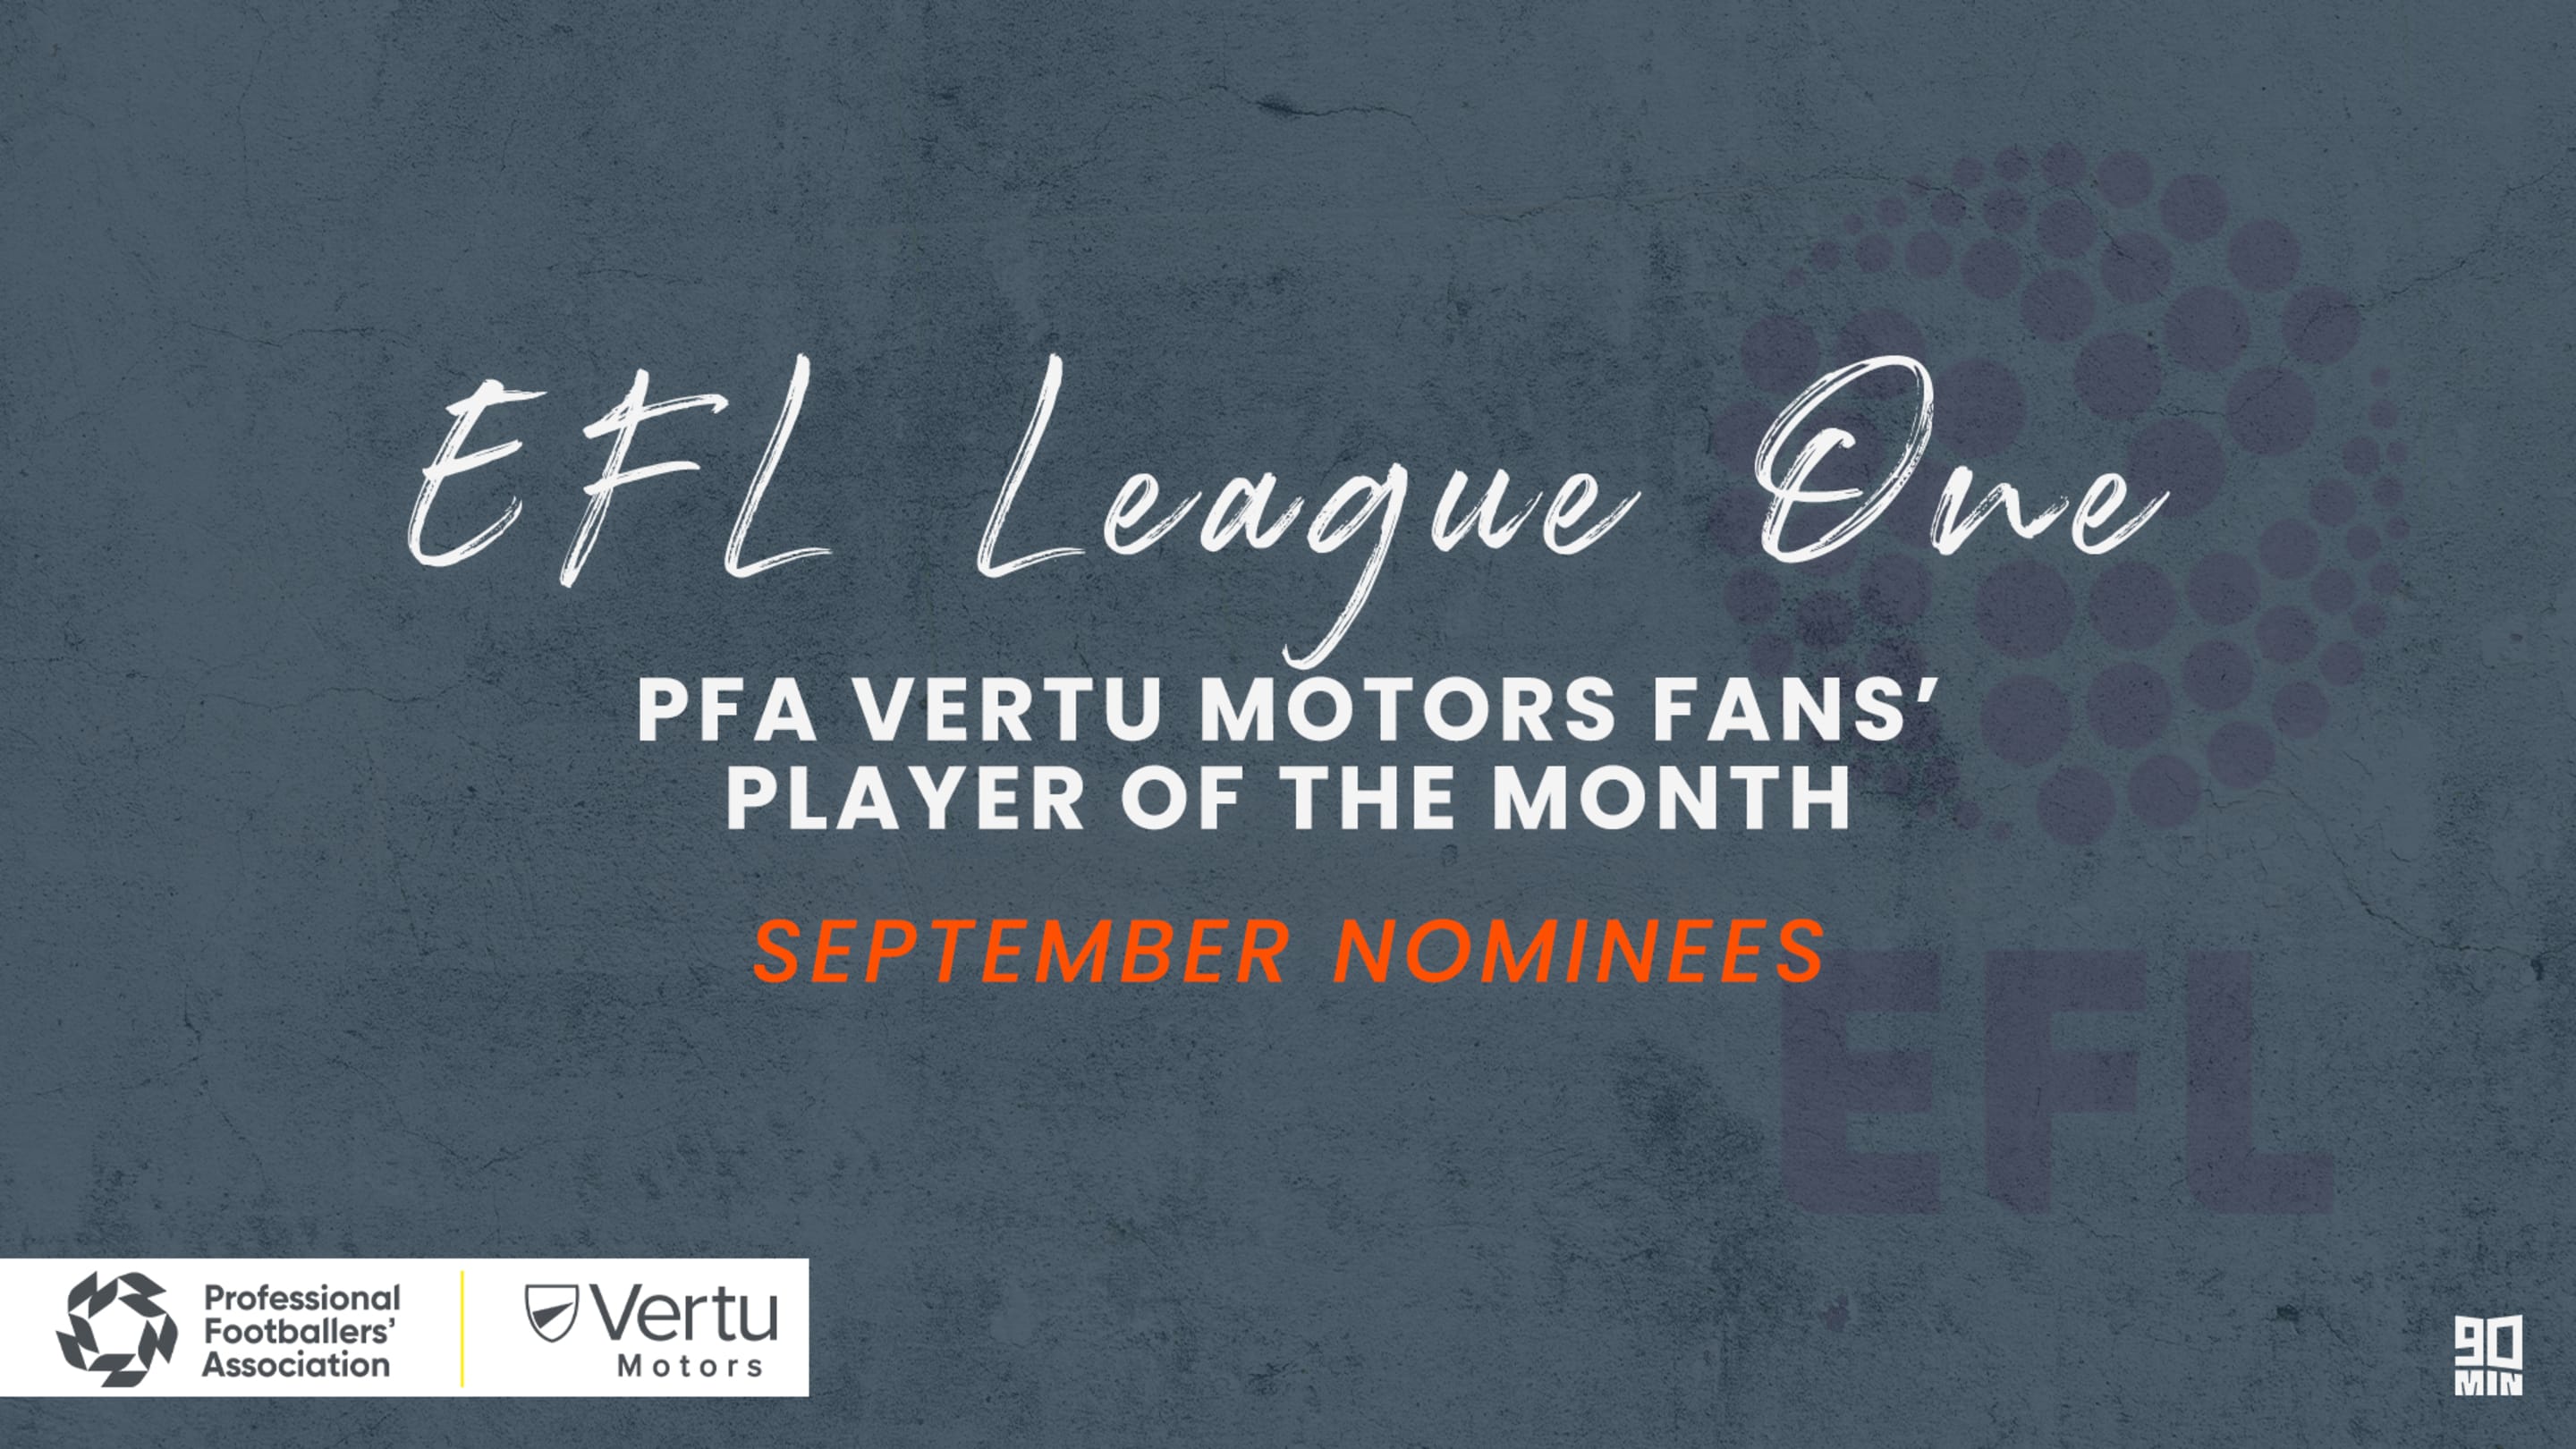 PFA Vertu Motors League One Fans' Player of the Month - September nominees